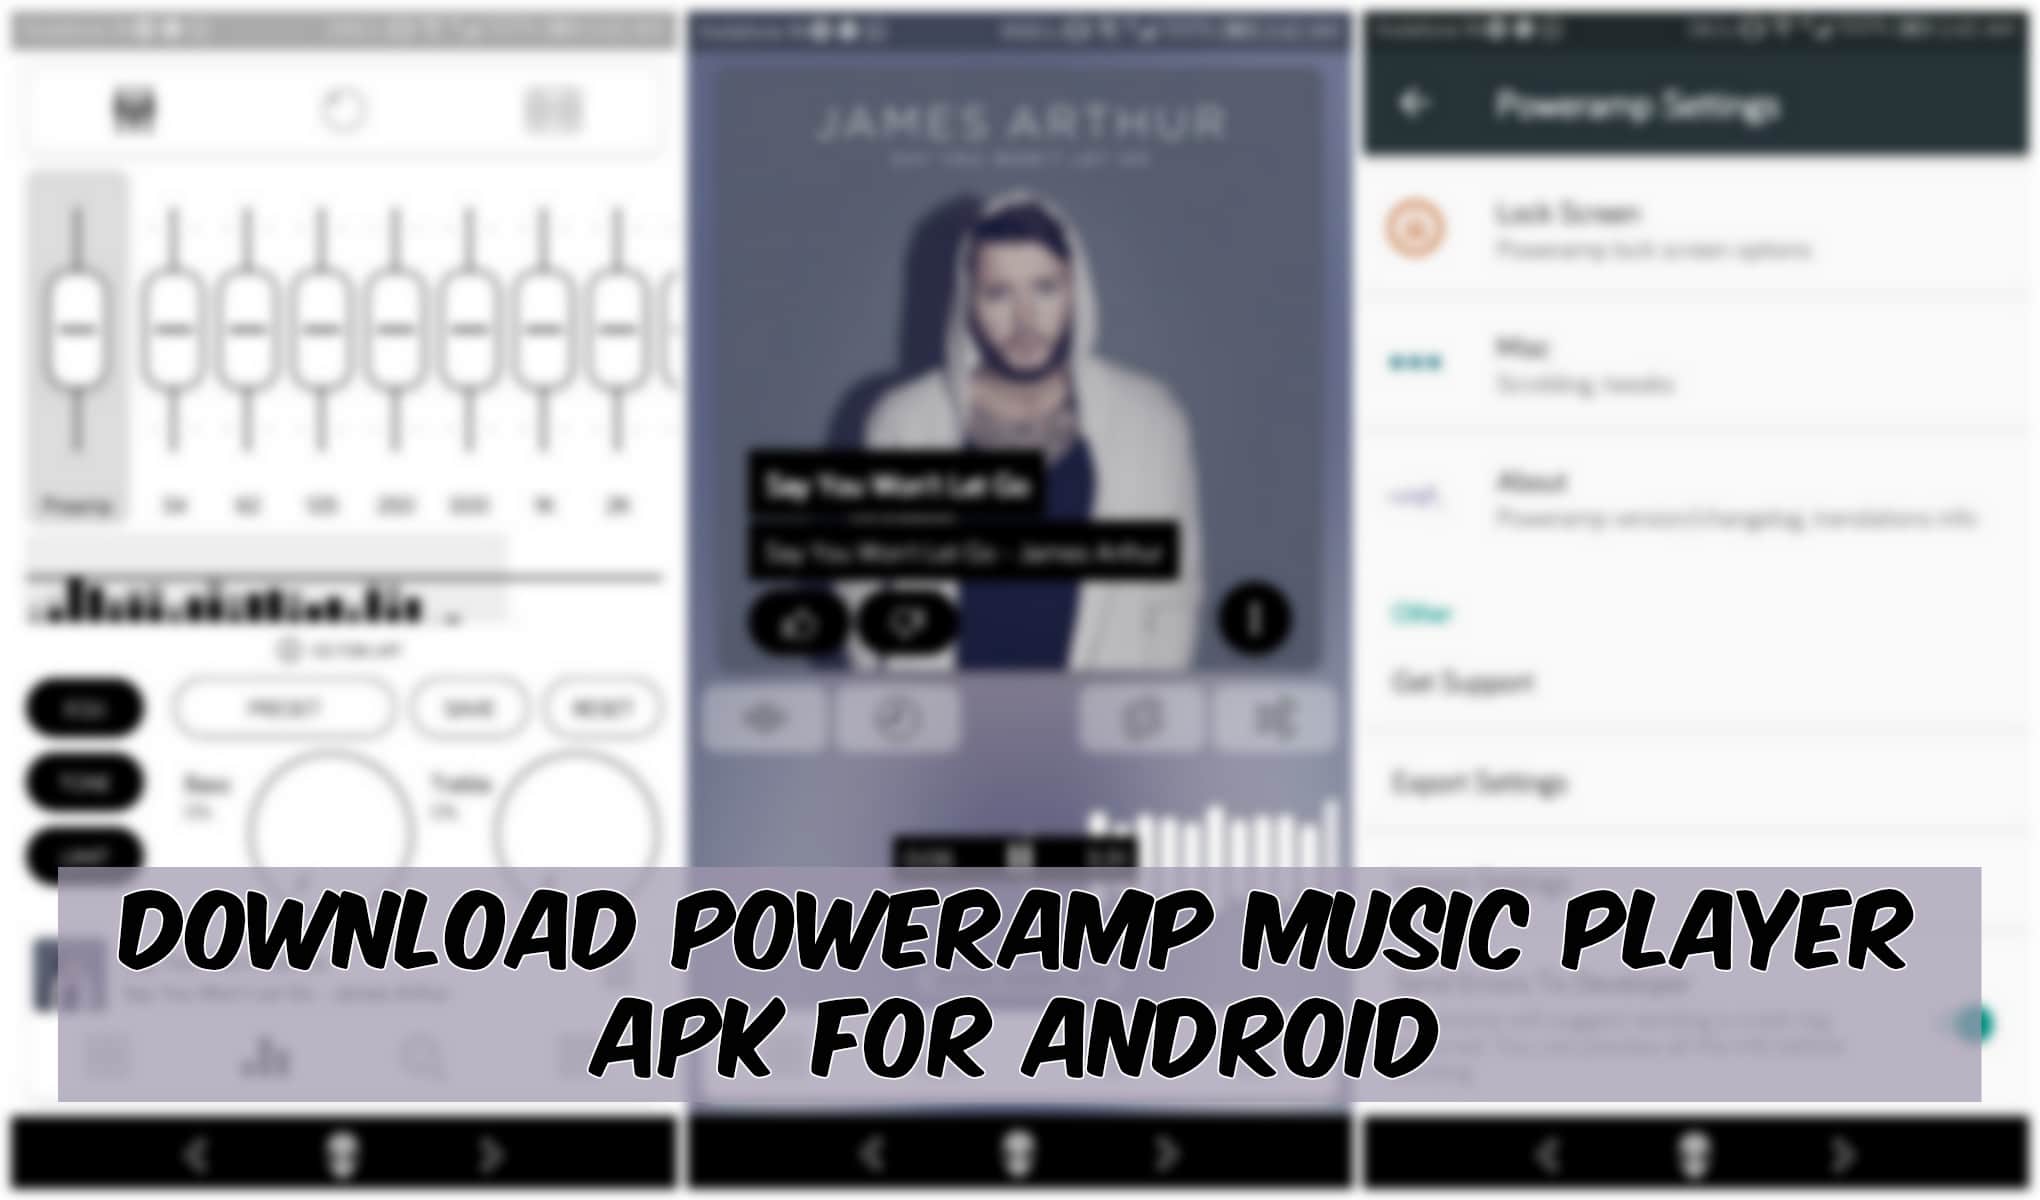 Poweramp music player for android apk free download